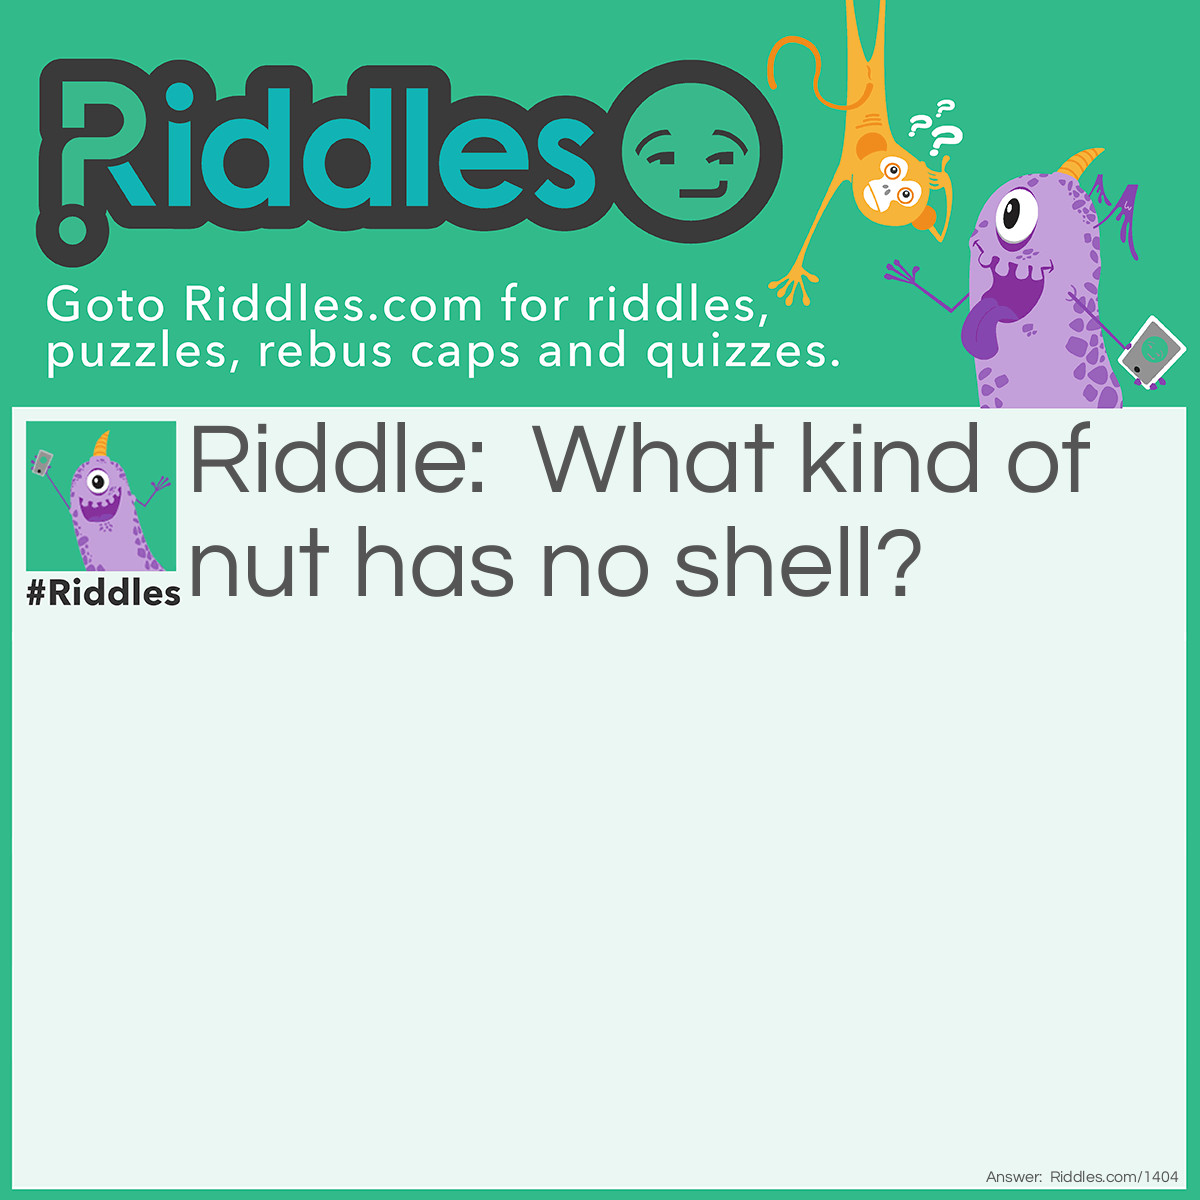 Riddle: What kind of nut has no shell? Answer: A Doughnut.